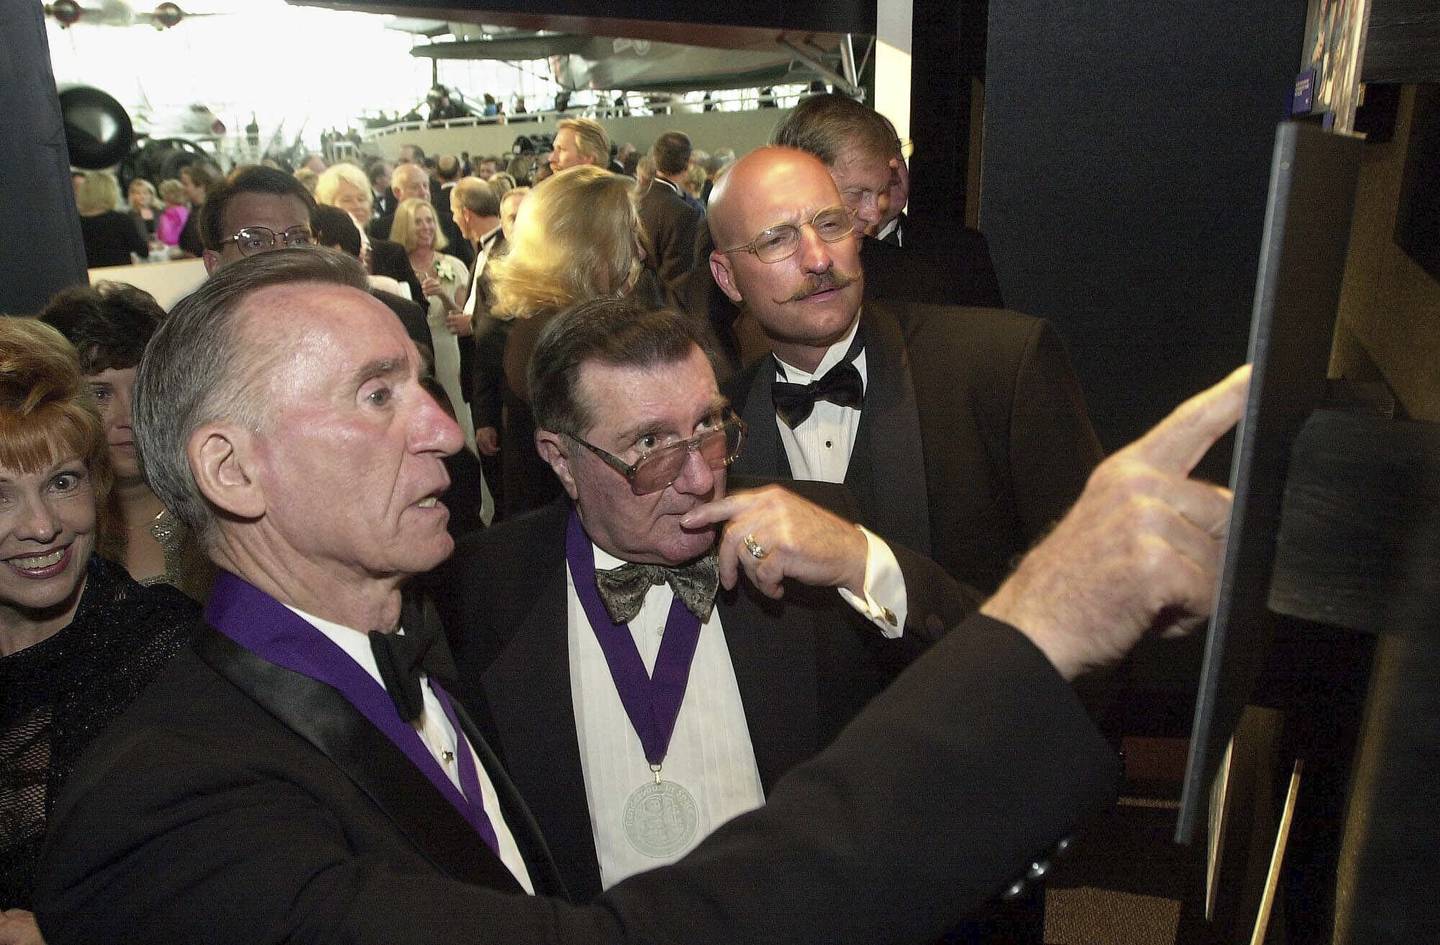 Apollo 7 astronaut Walter Cunningham, left, points to pictures of fellow astronaut the late Charles "Pete" Conrad while speaking with Apollo 10 astronaut Dick Gordon, center, and Andy Conrad, the son of Charles Conrad, at the opening of the Rendezvous in Space exhibit at the Museum of Flight in Seattle, Wash., July 22, 2000.